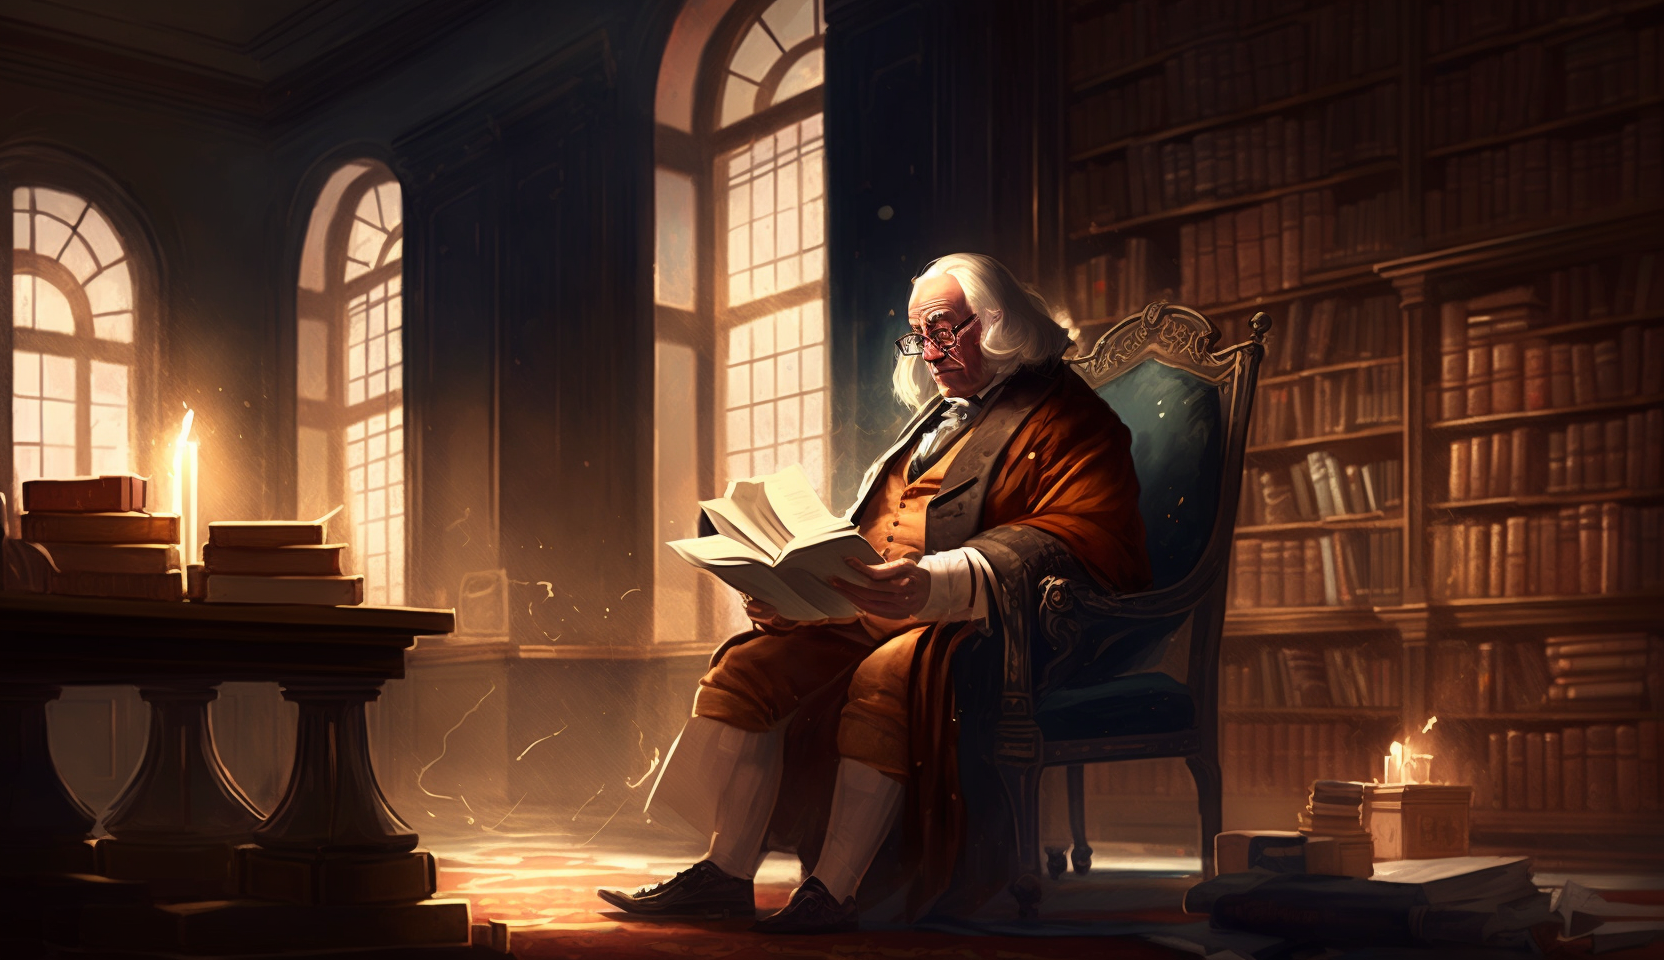 An illustration of Benjamin Franklin sitting in an 18th century library reading